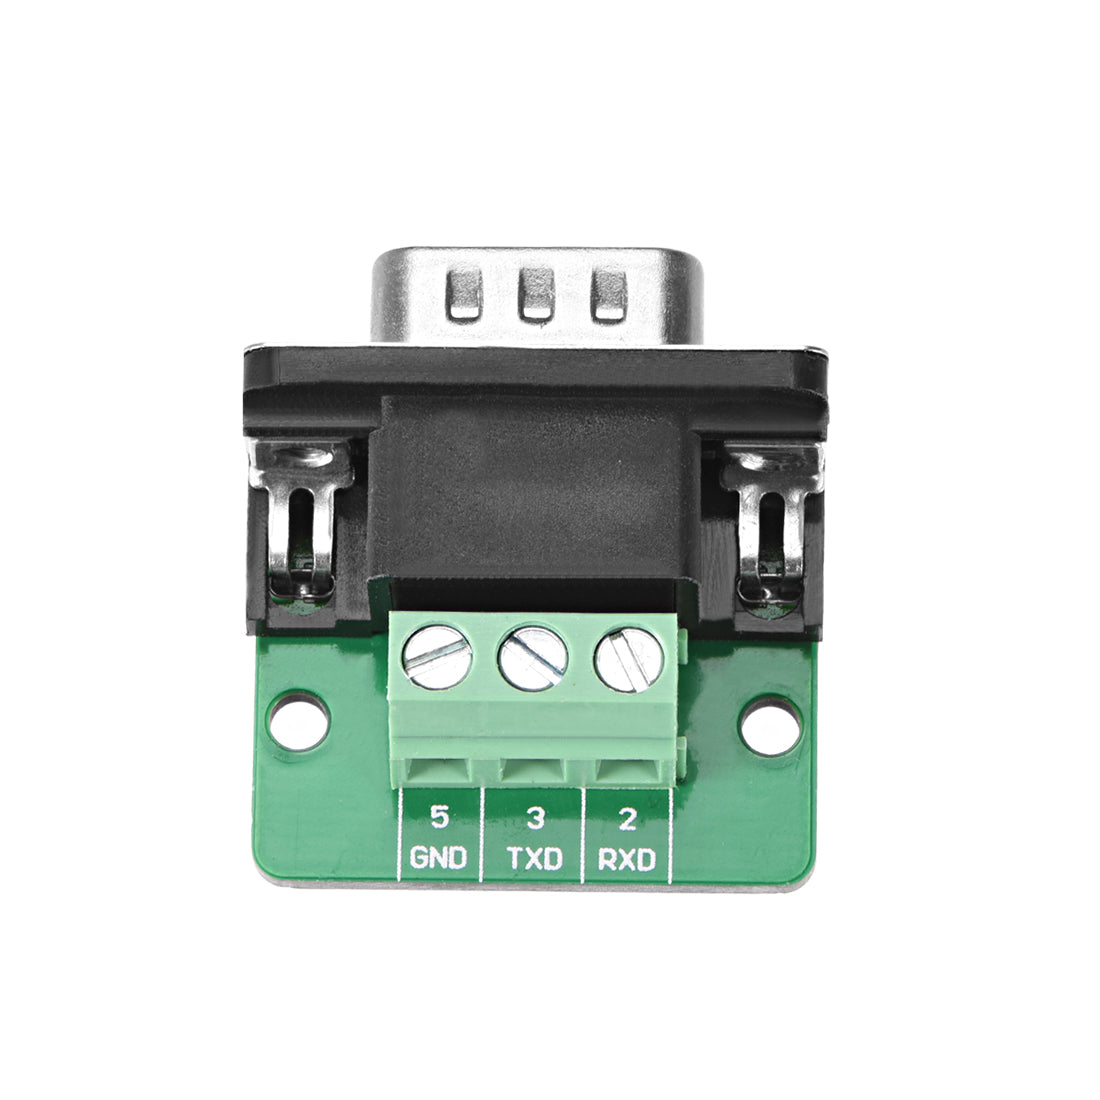 uxcell Uxcell D-sub DB9 Breakout Board Connector 9 Pin 2 Row Male Port Solderless Terminal Block Adapter